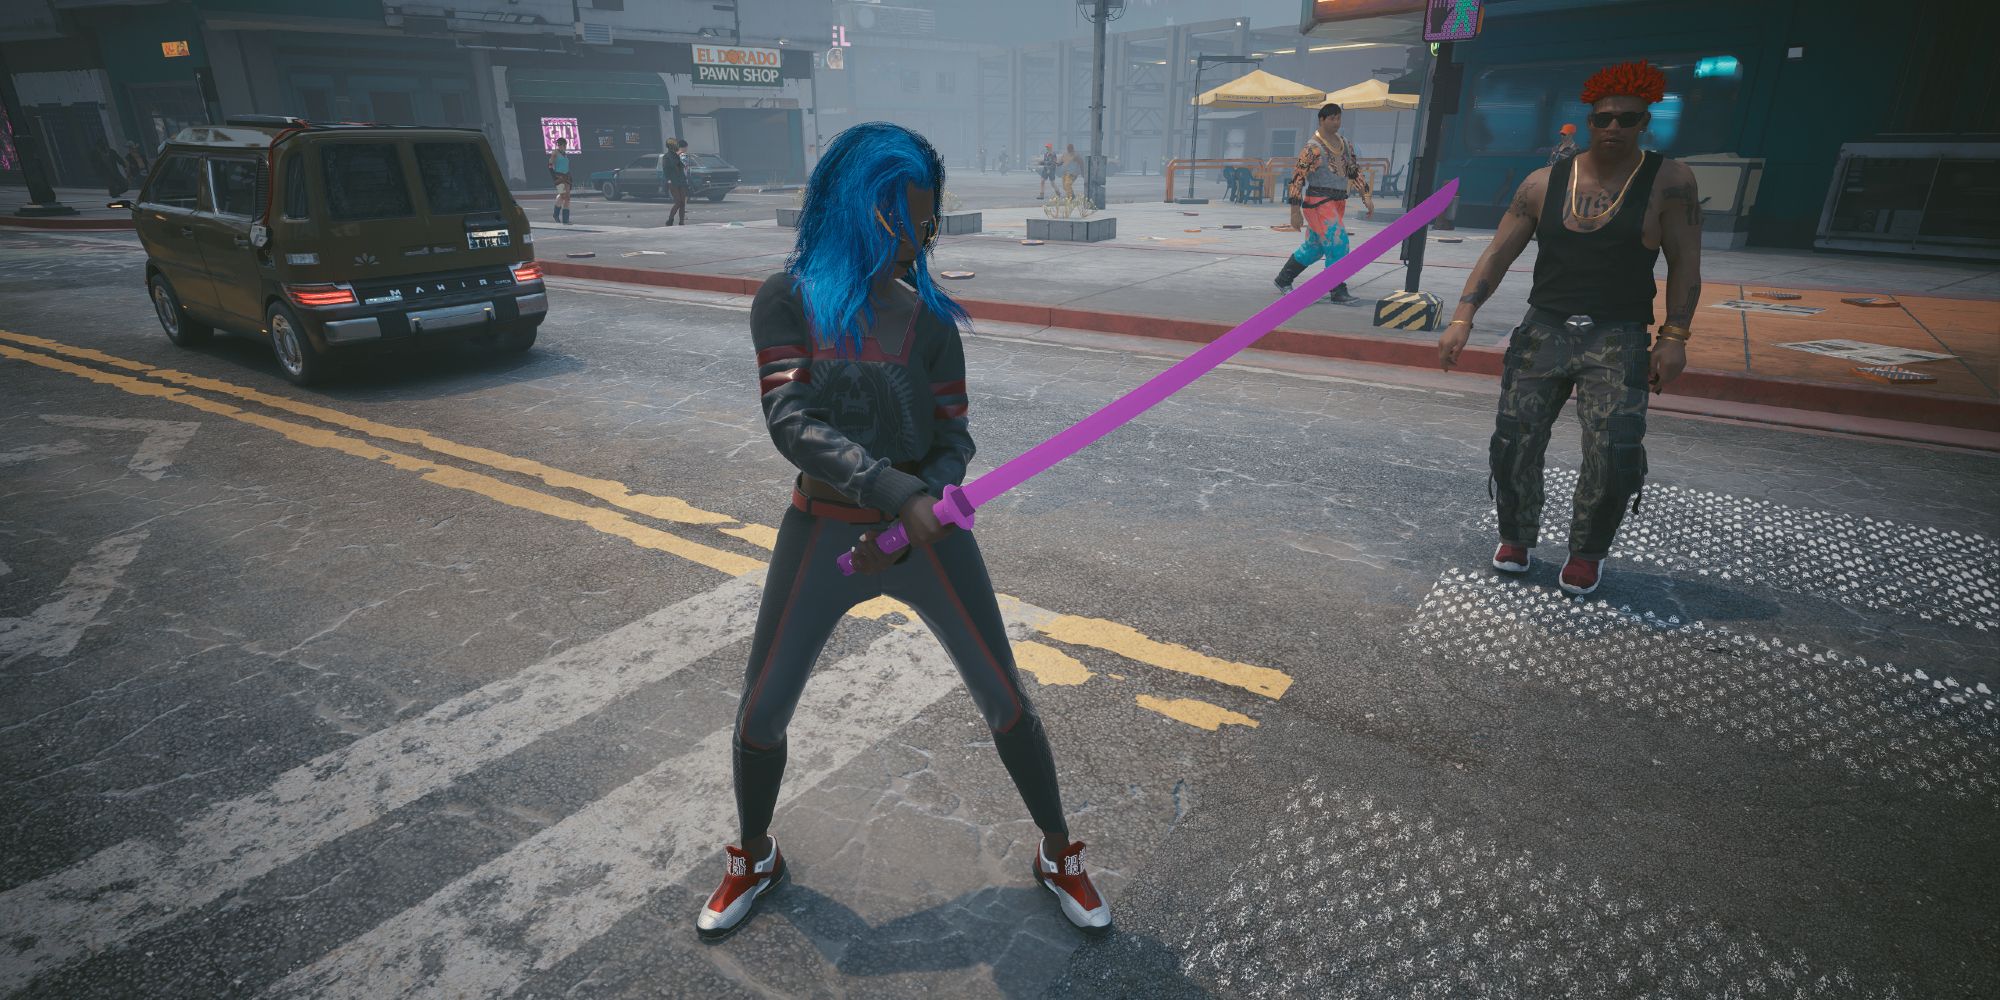 V holding the Cocktail Stick Iconic weapon in Cyberpunk 2077.